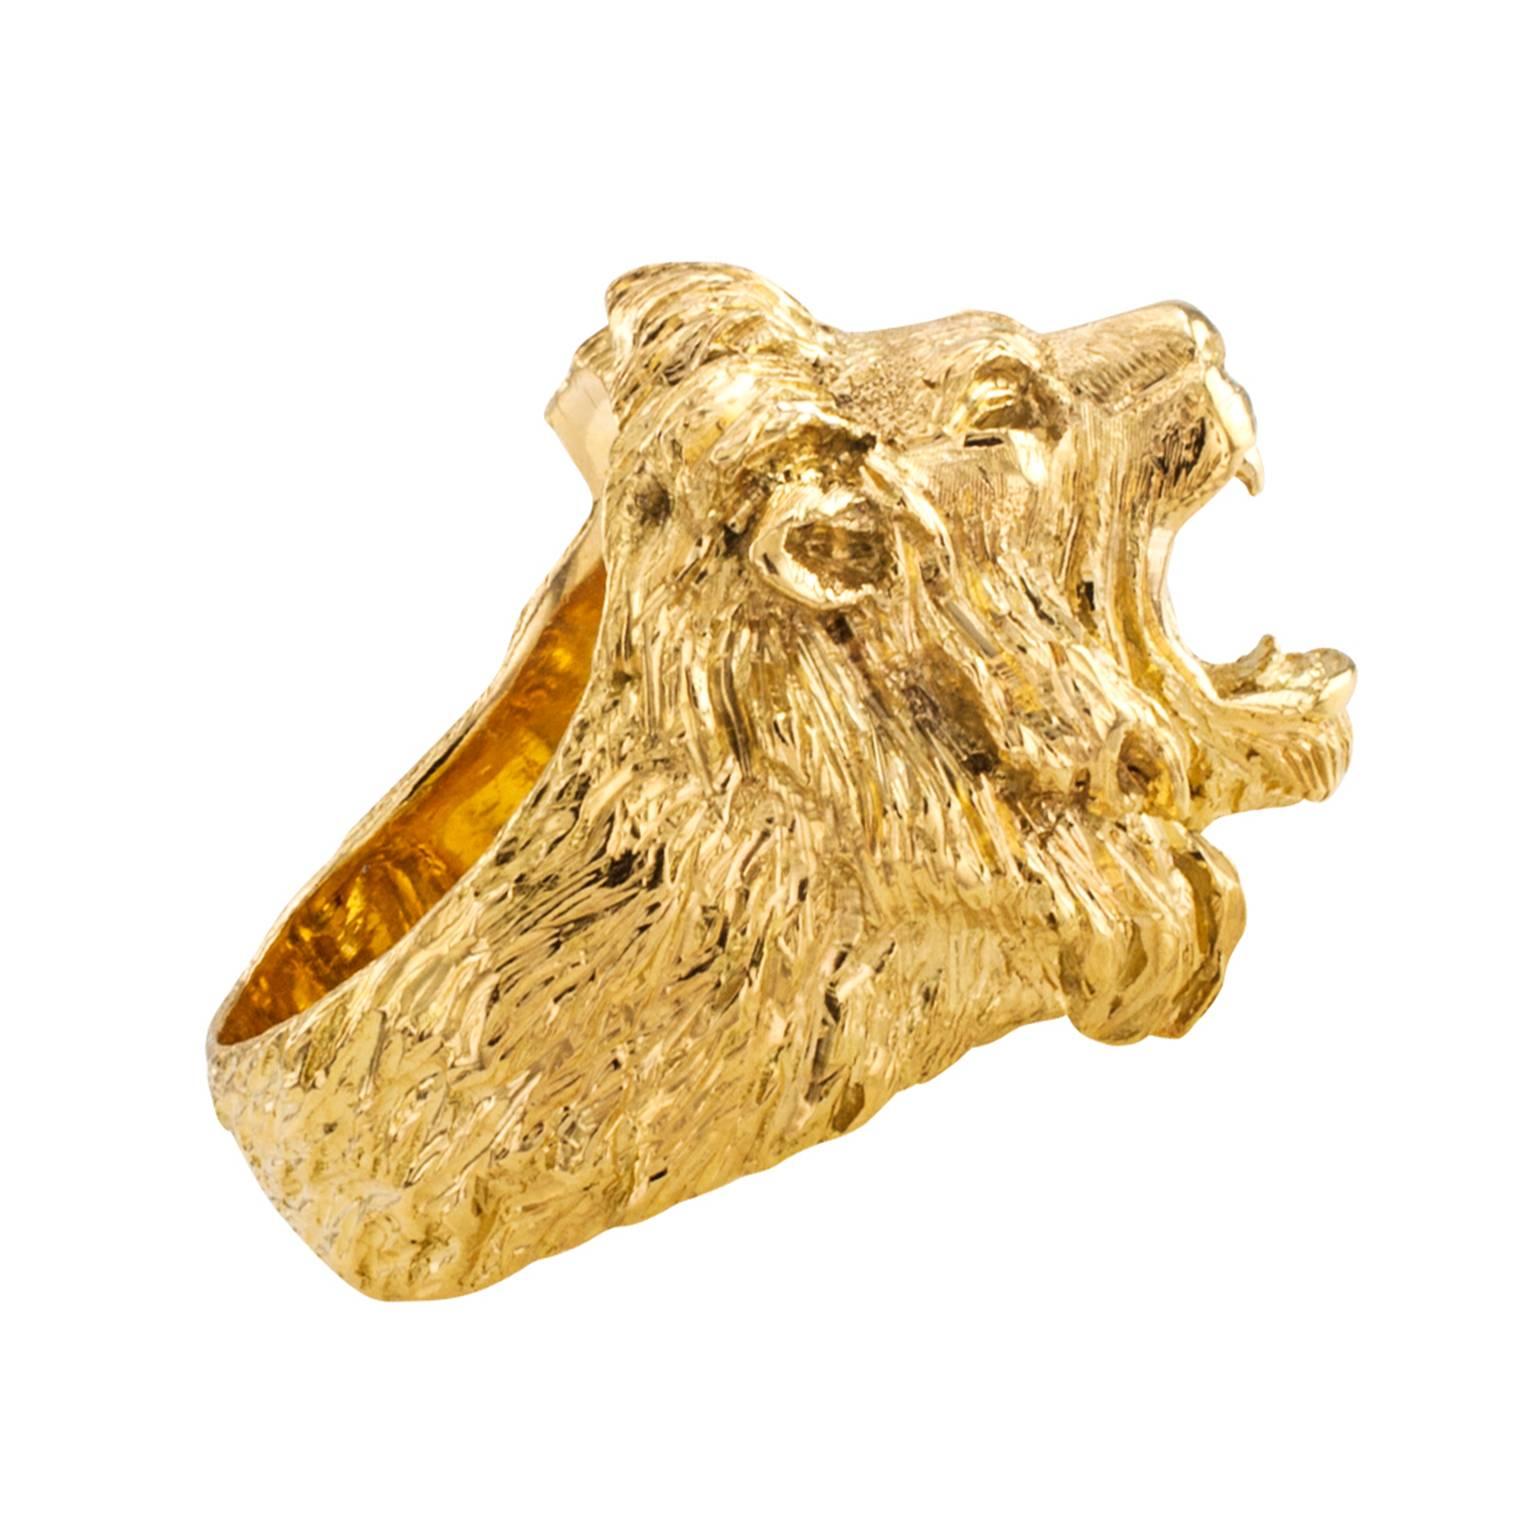 Buccellati Gold Lion Head Estate Ring

Not exactly Leo the Friendly Lion.  It is more like, don't mess with me.  I mean business.  This is  a roaring and highly detailed representation of the king of the jungle's face and mane, sculpted in 18